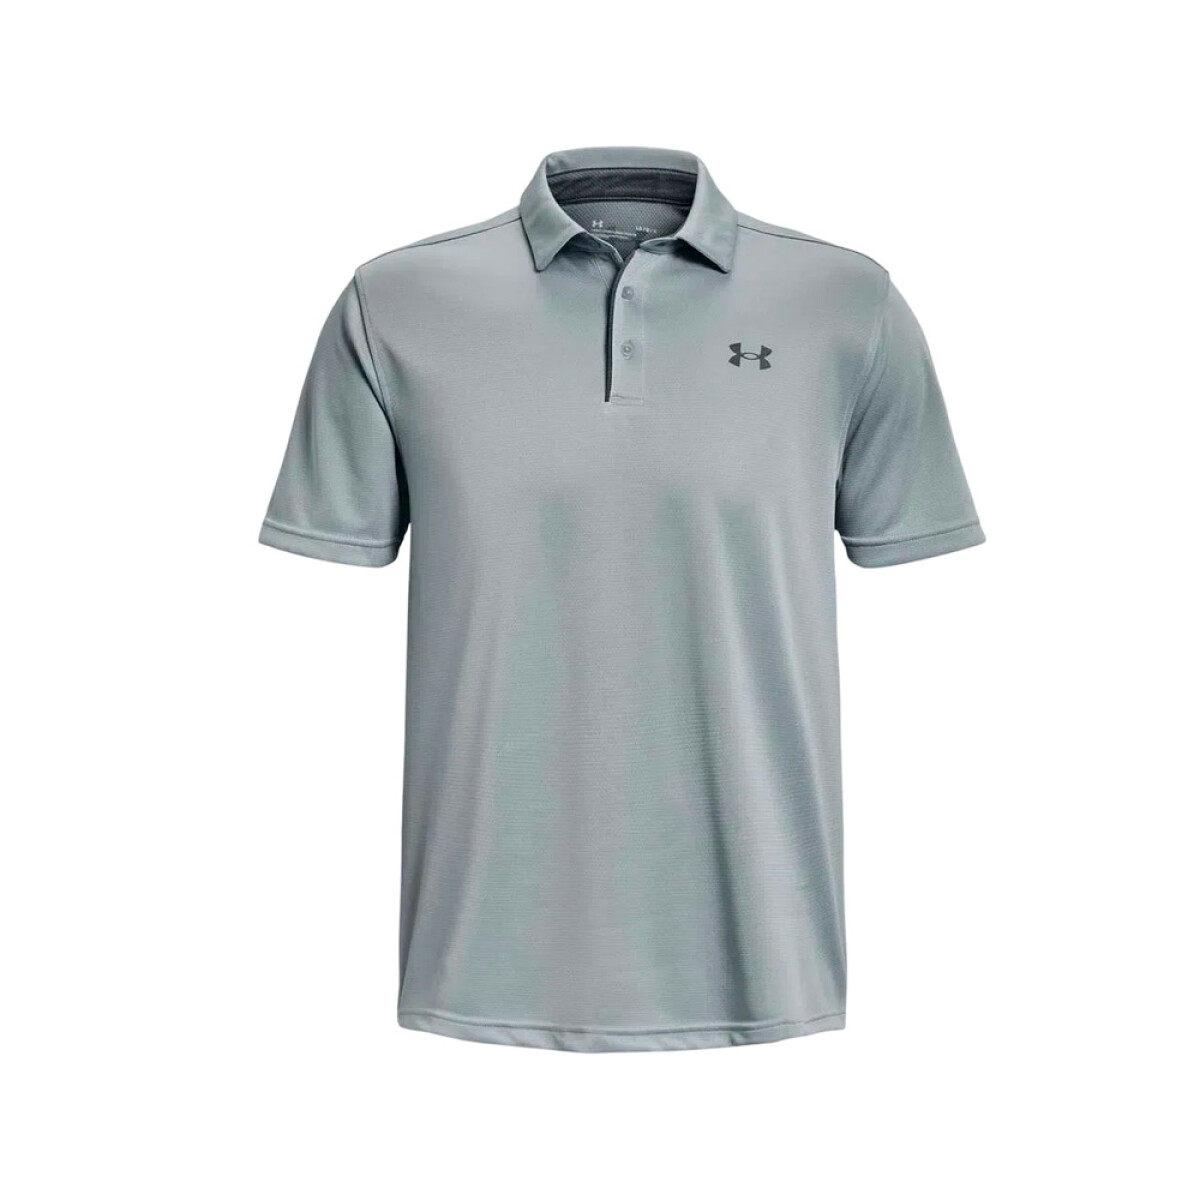 REMERA UNDER ARMOUR TECH POLO UPDATE - Grey 